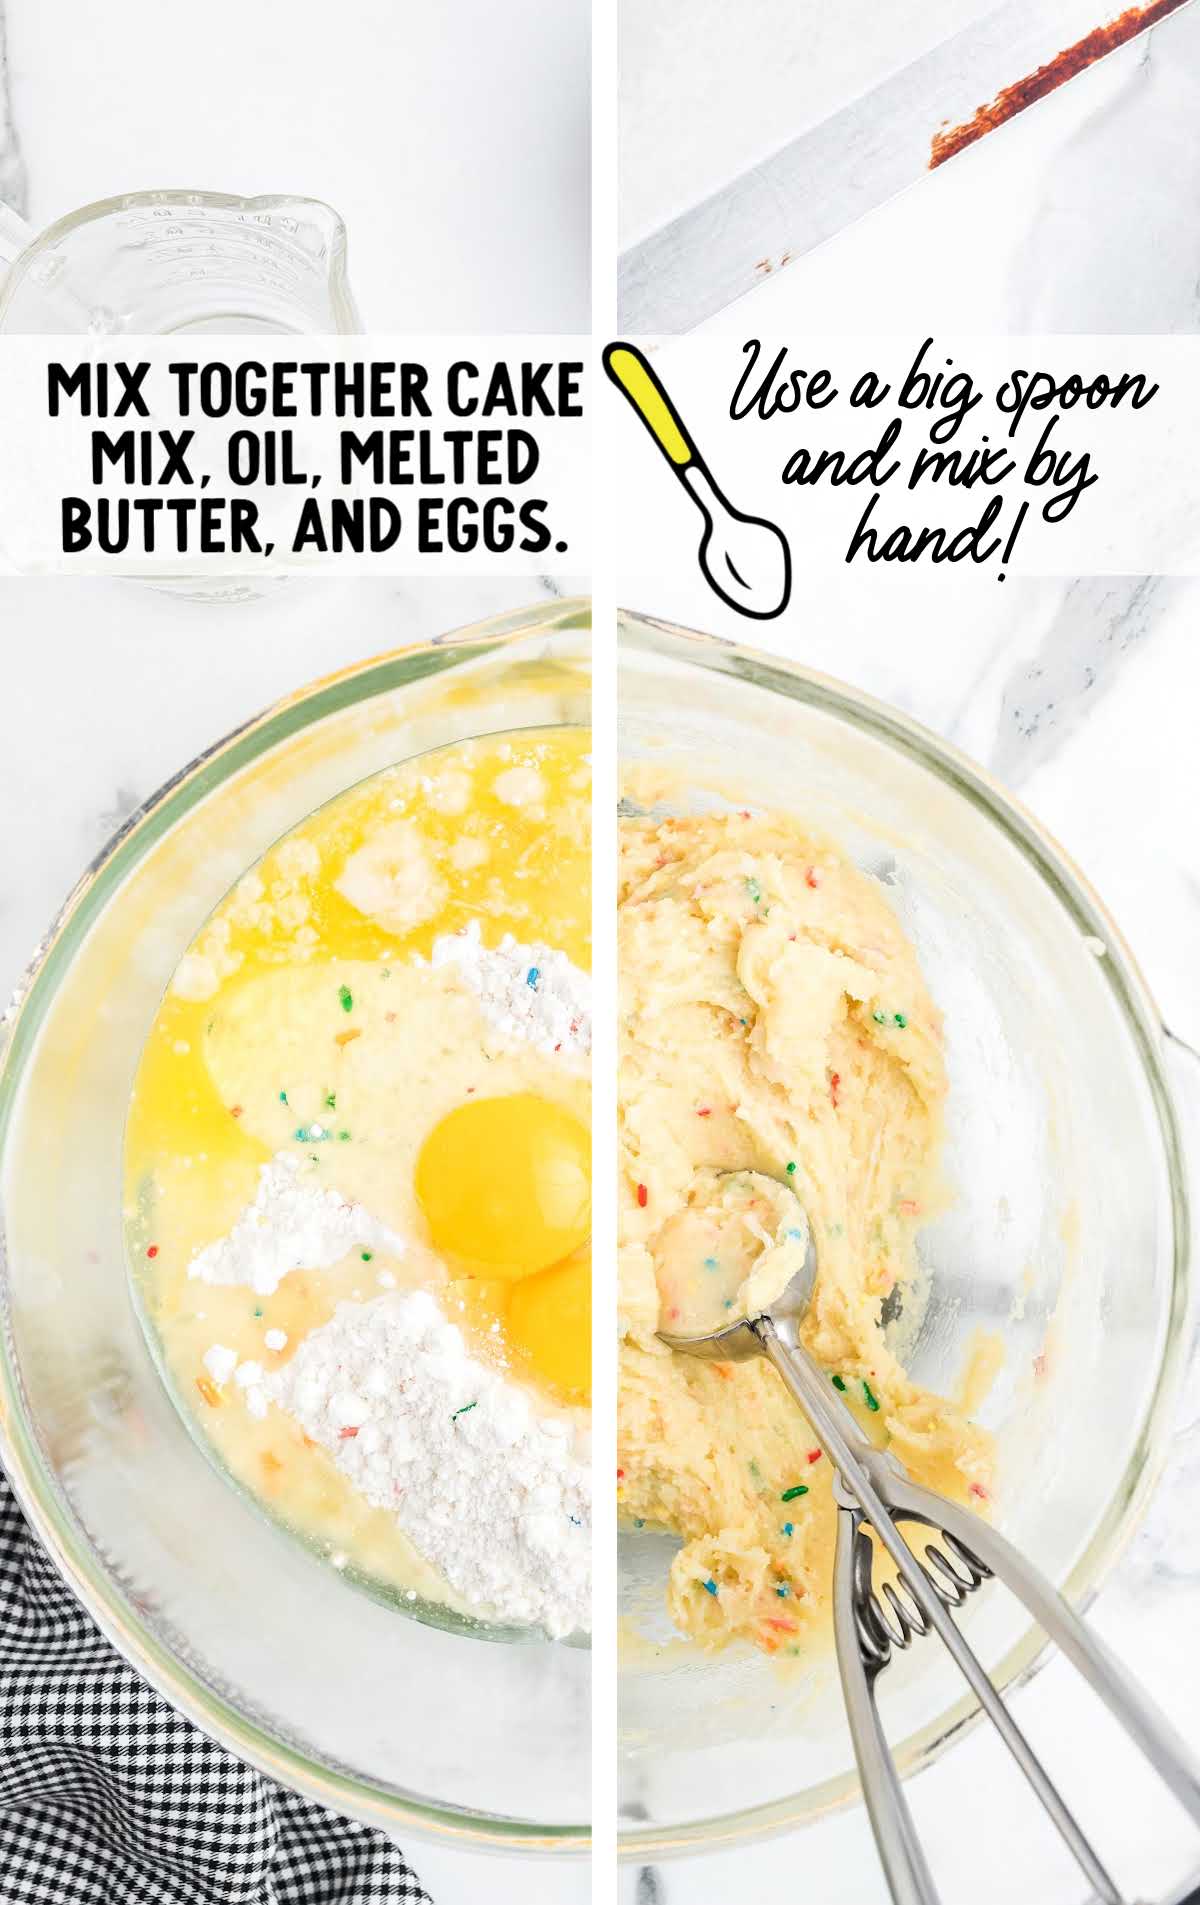 cake mix, oil, melted butter and eggs mixed together in a bowl